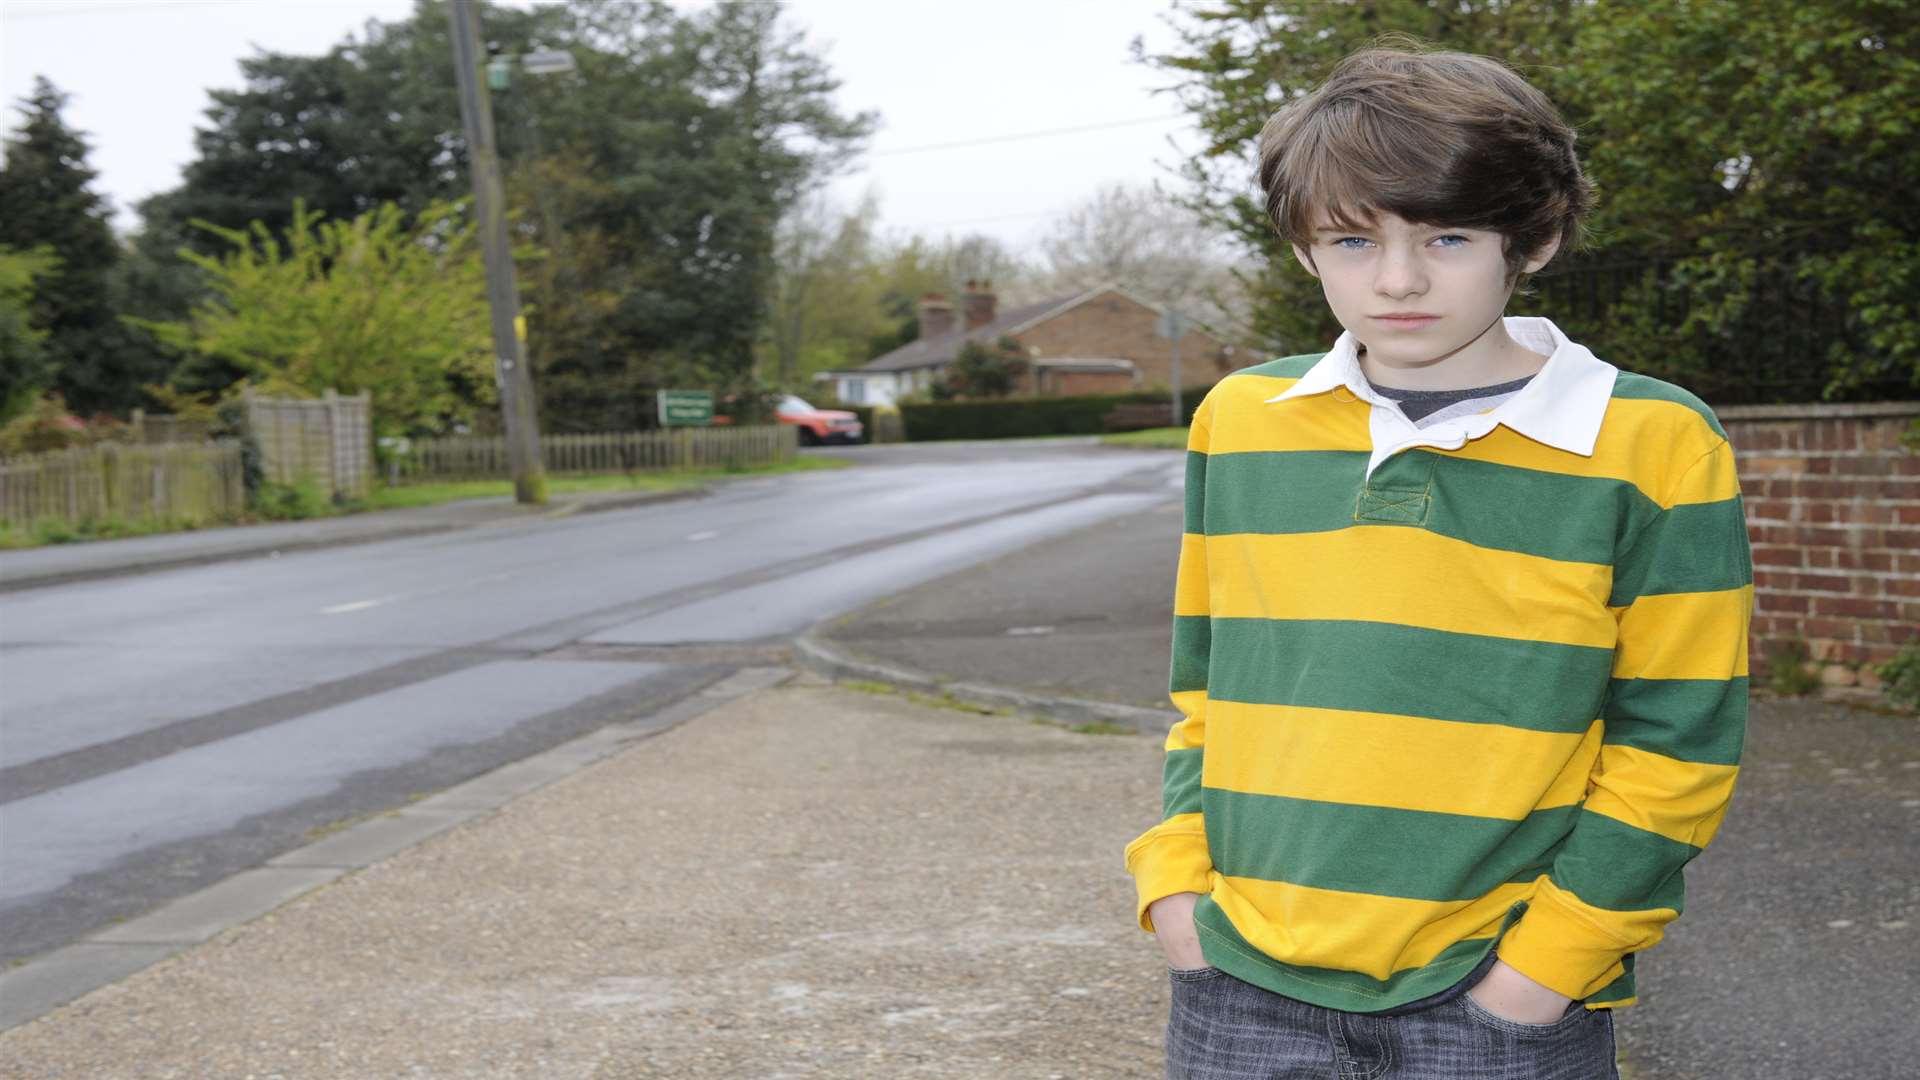 Louis Rorison, 12, was offered taxis instead of the bus pass